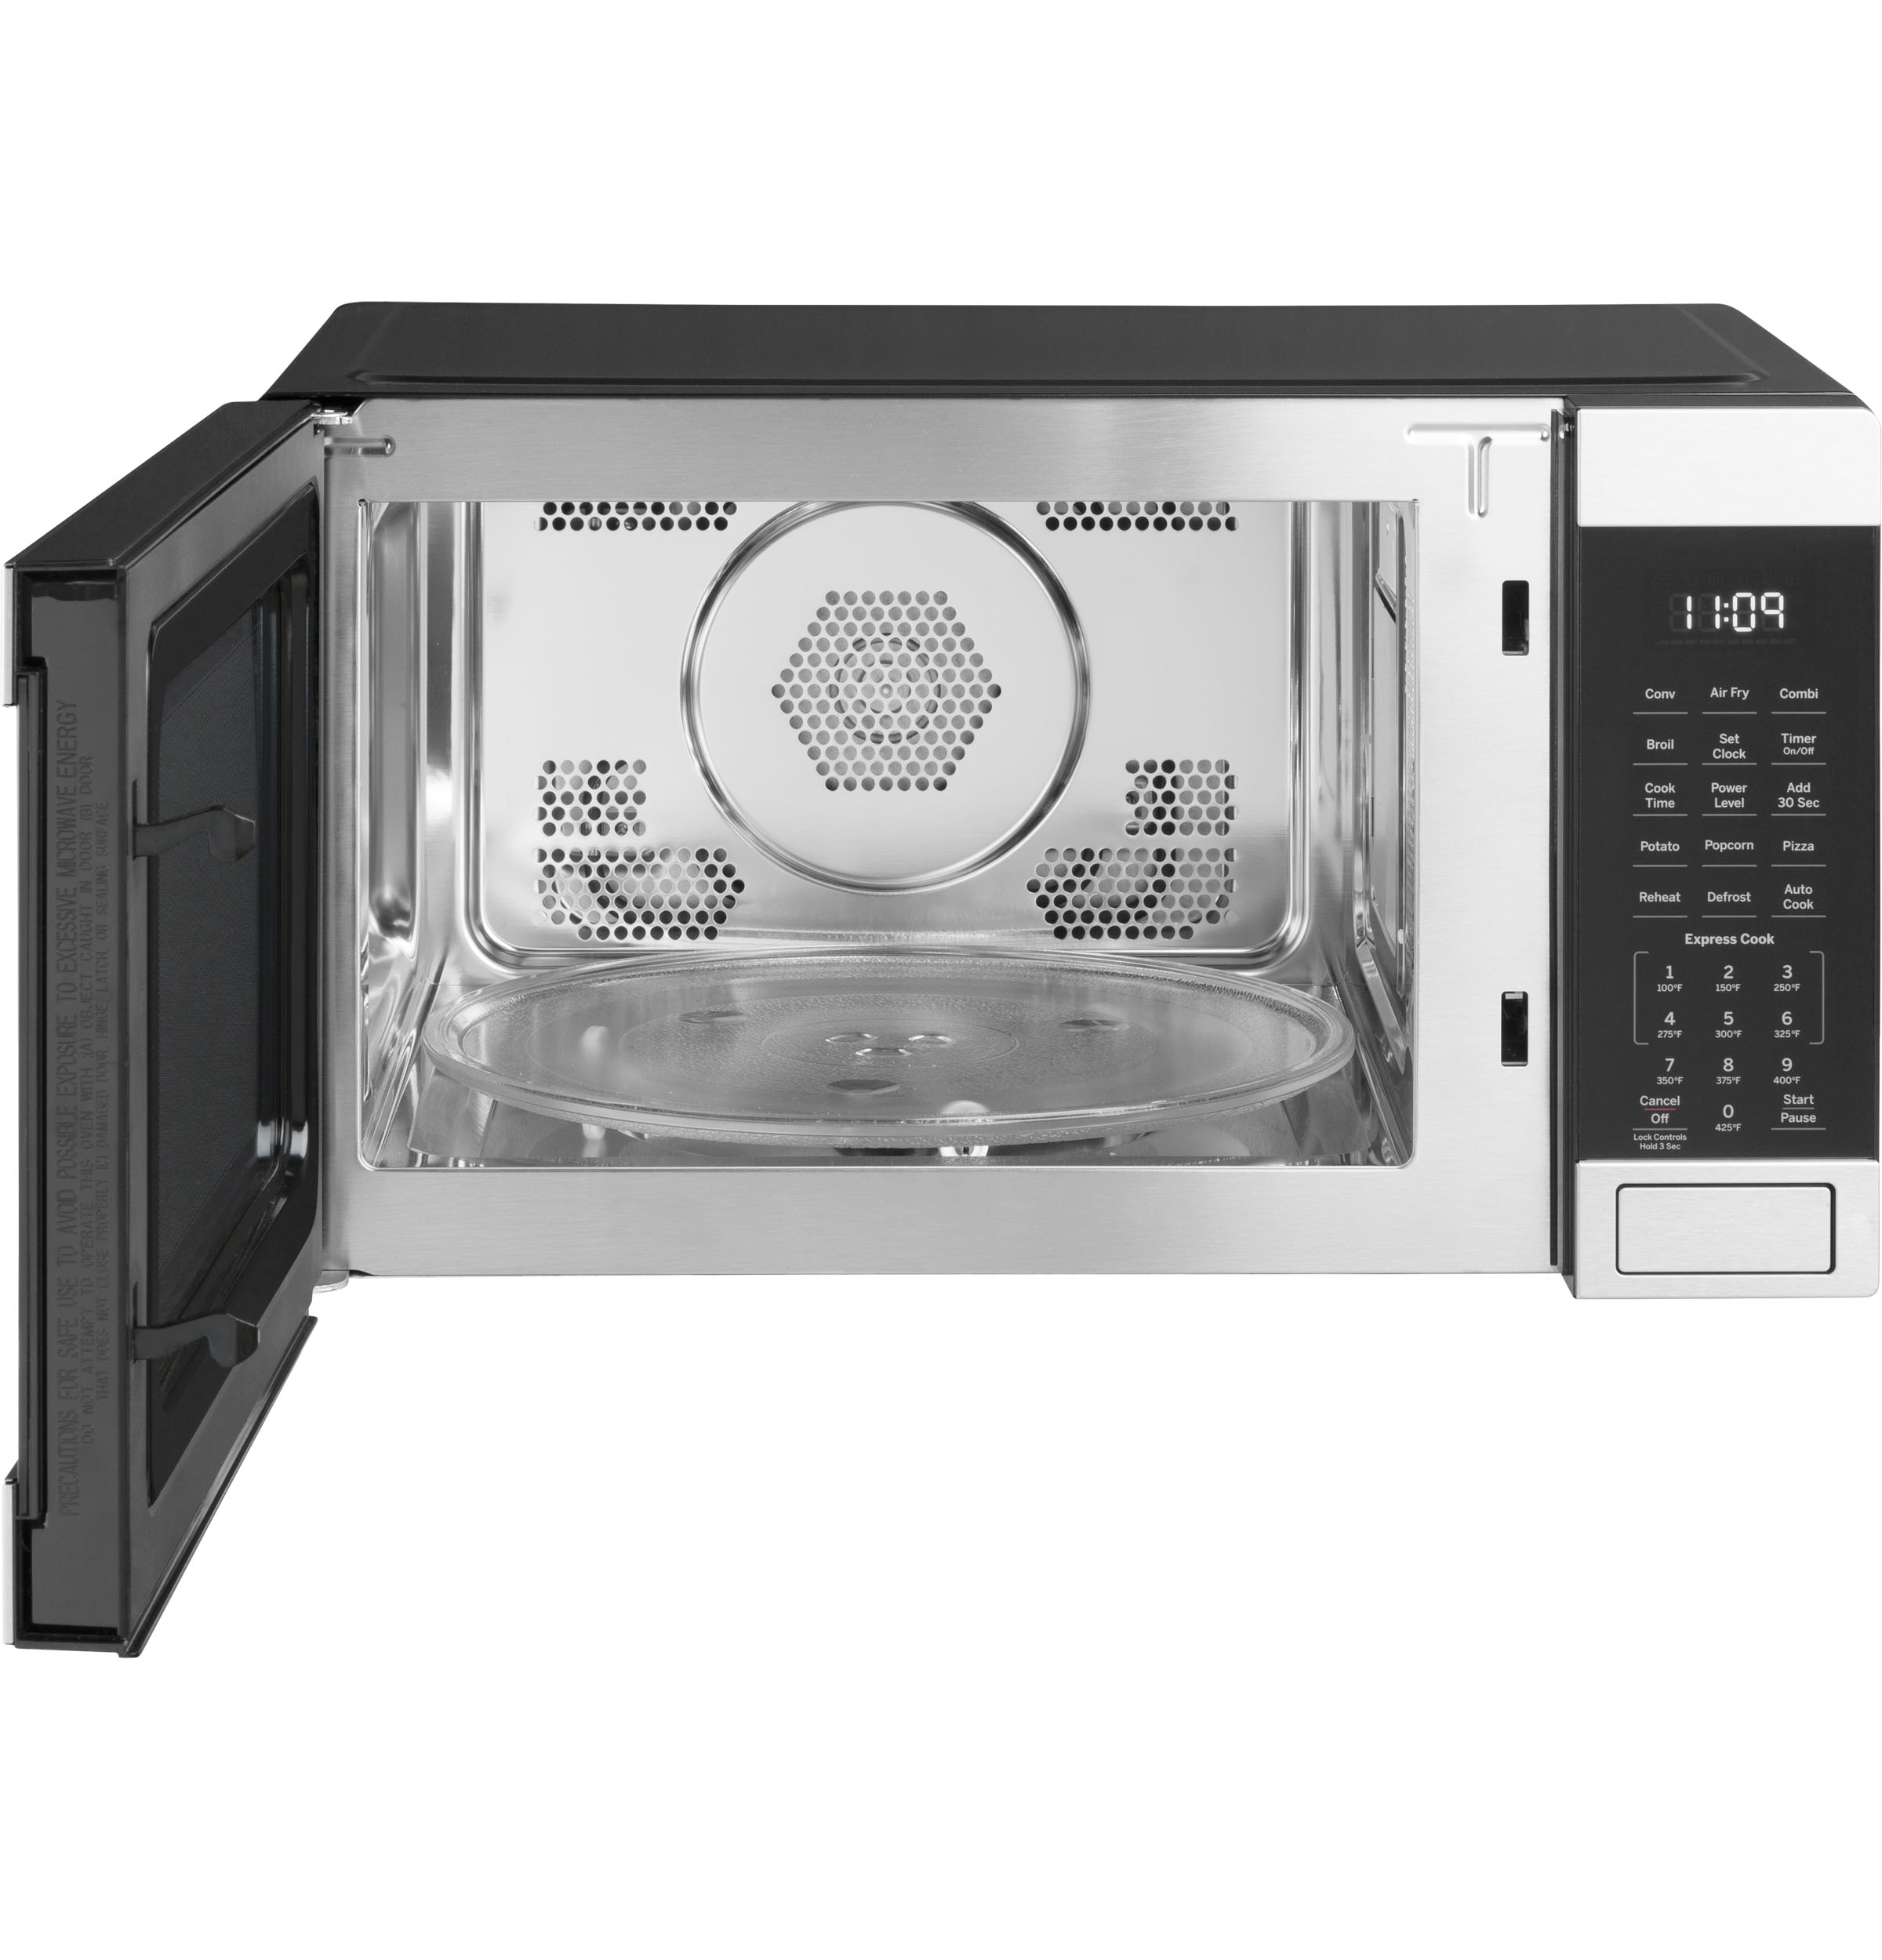  Cuisinart CMW-100 1-Cubic-Foot Stainless Steel Microwave Oven,  Brushed Chrome: Countertop Microwave Ovens: Home & Kitchen